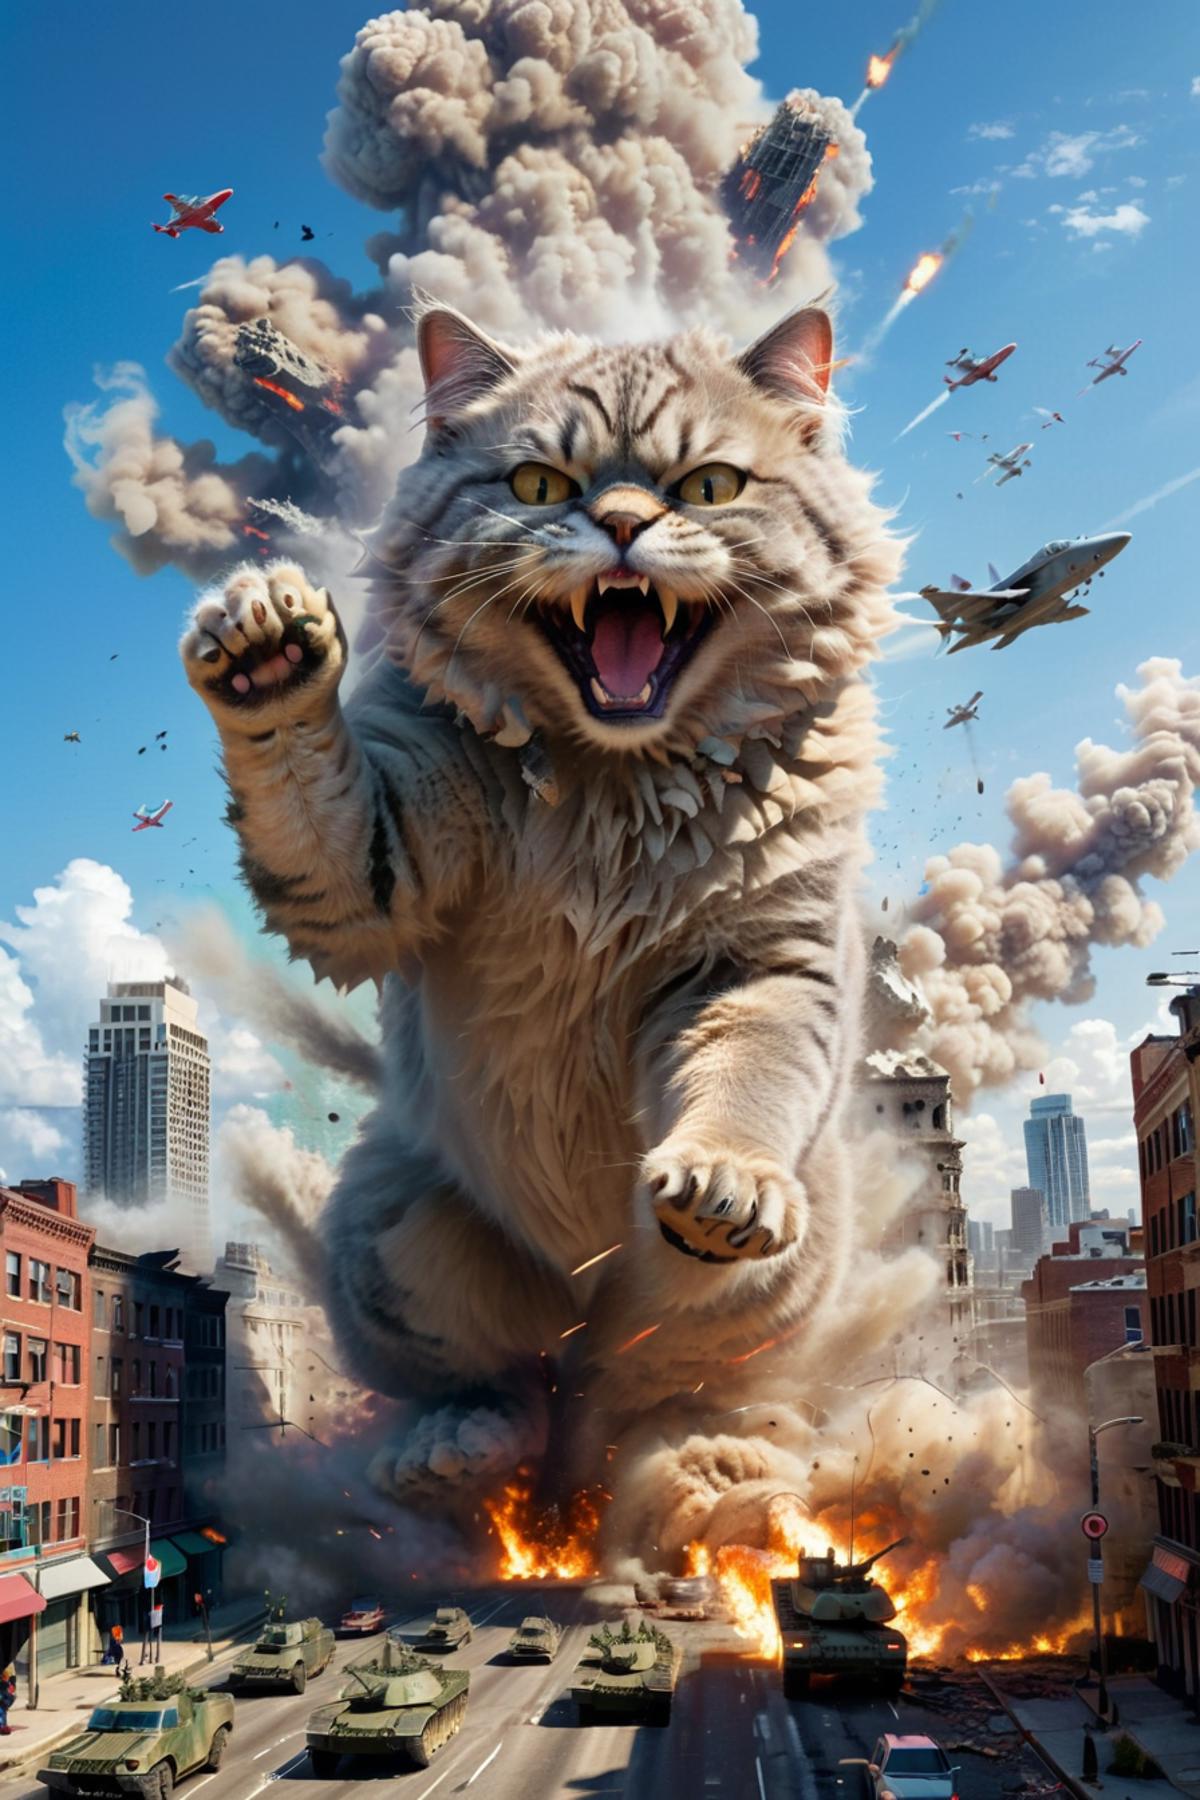 A giant cat with a ferocious expression is standing in the middle of a city, surrounded by destruction and chaos. The cat appears to be the main focus of the scene, with its mouth open and claws out, as if it is attacking the city. The city is filled with buildings, and there are multiple airplanes flying overhead, adding to the sense of chaos and destruction. The cat's size and presence create a sense of danger and unease, as it seems to be the cause of the destruction in the city.